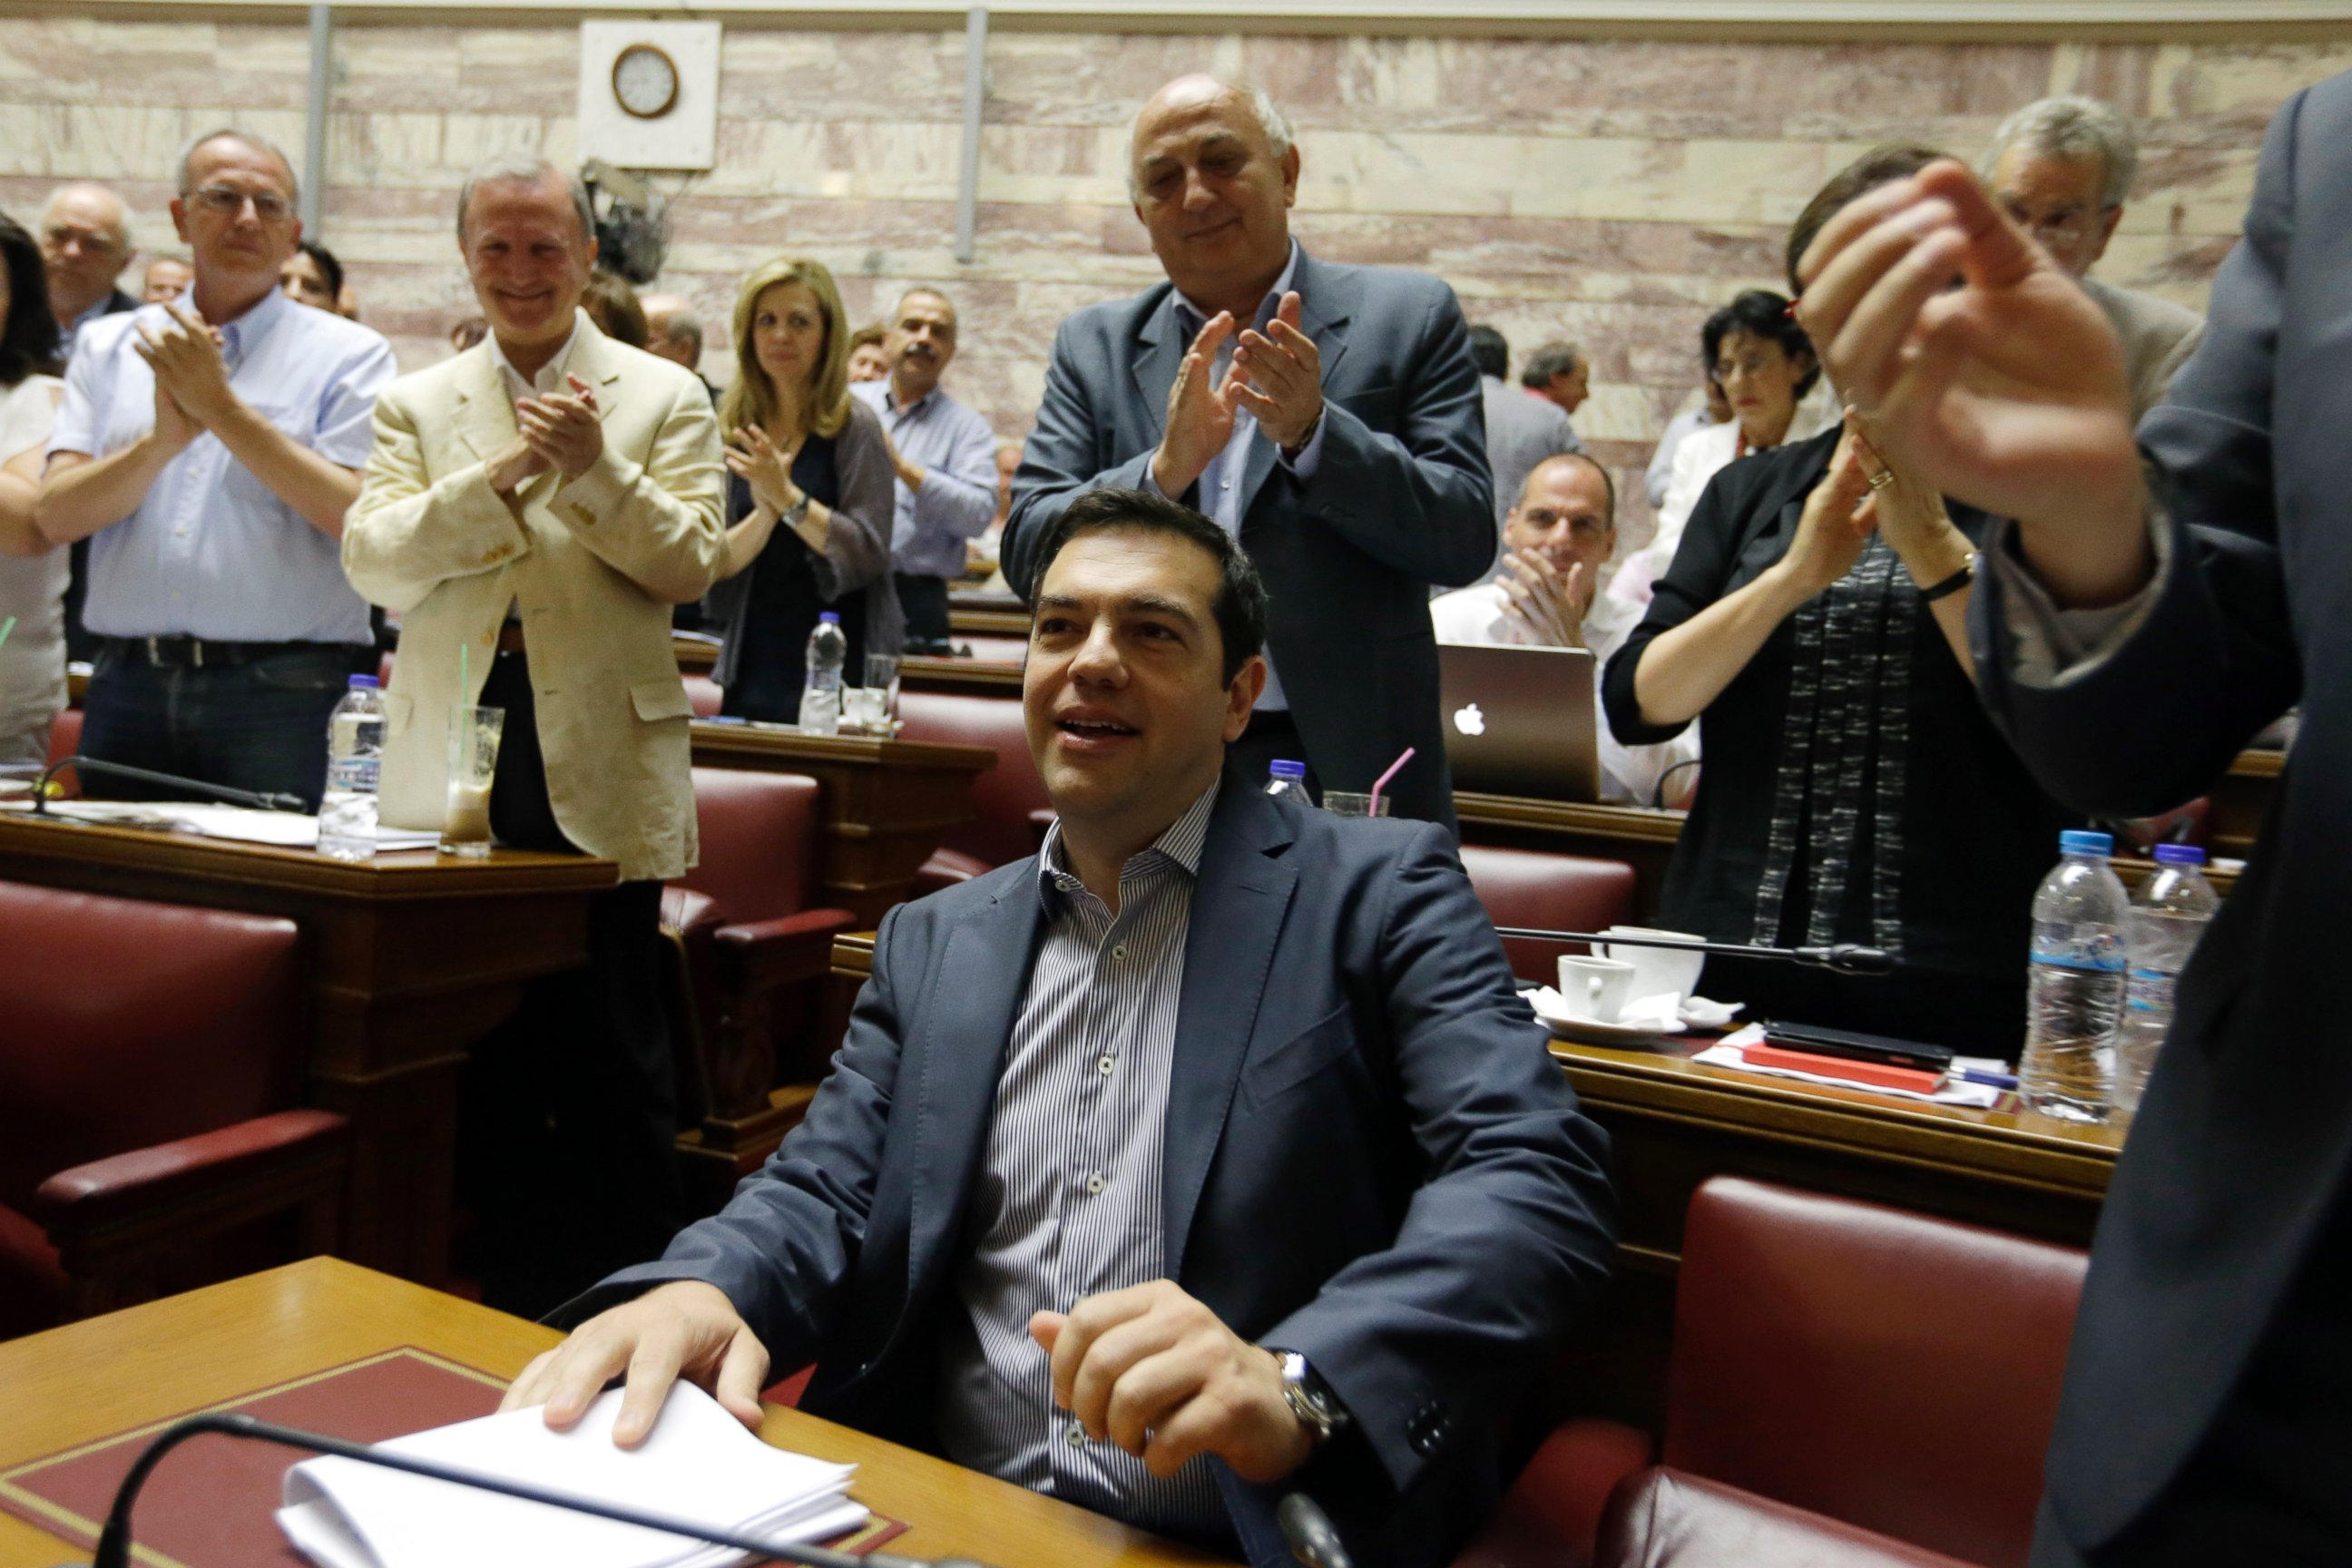 PHOTO: Greece's Prime Minister Alexis Tsipras arrives for a meeting as his lawmakers of Syriza party applaud him at the Greek Parliament in Athens, July 10, 2015.